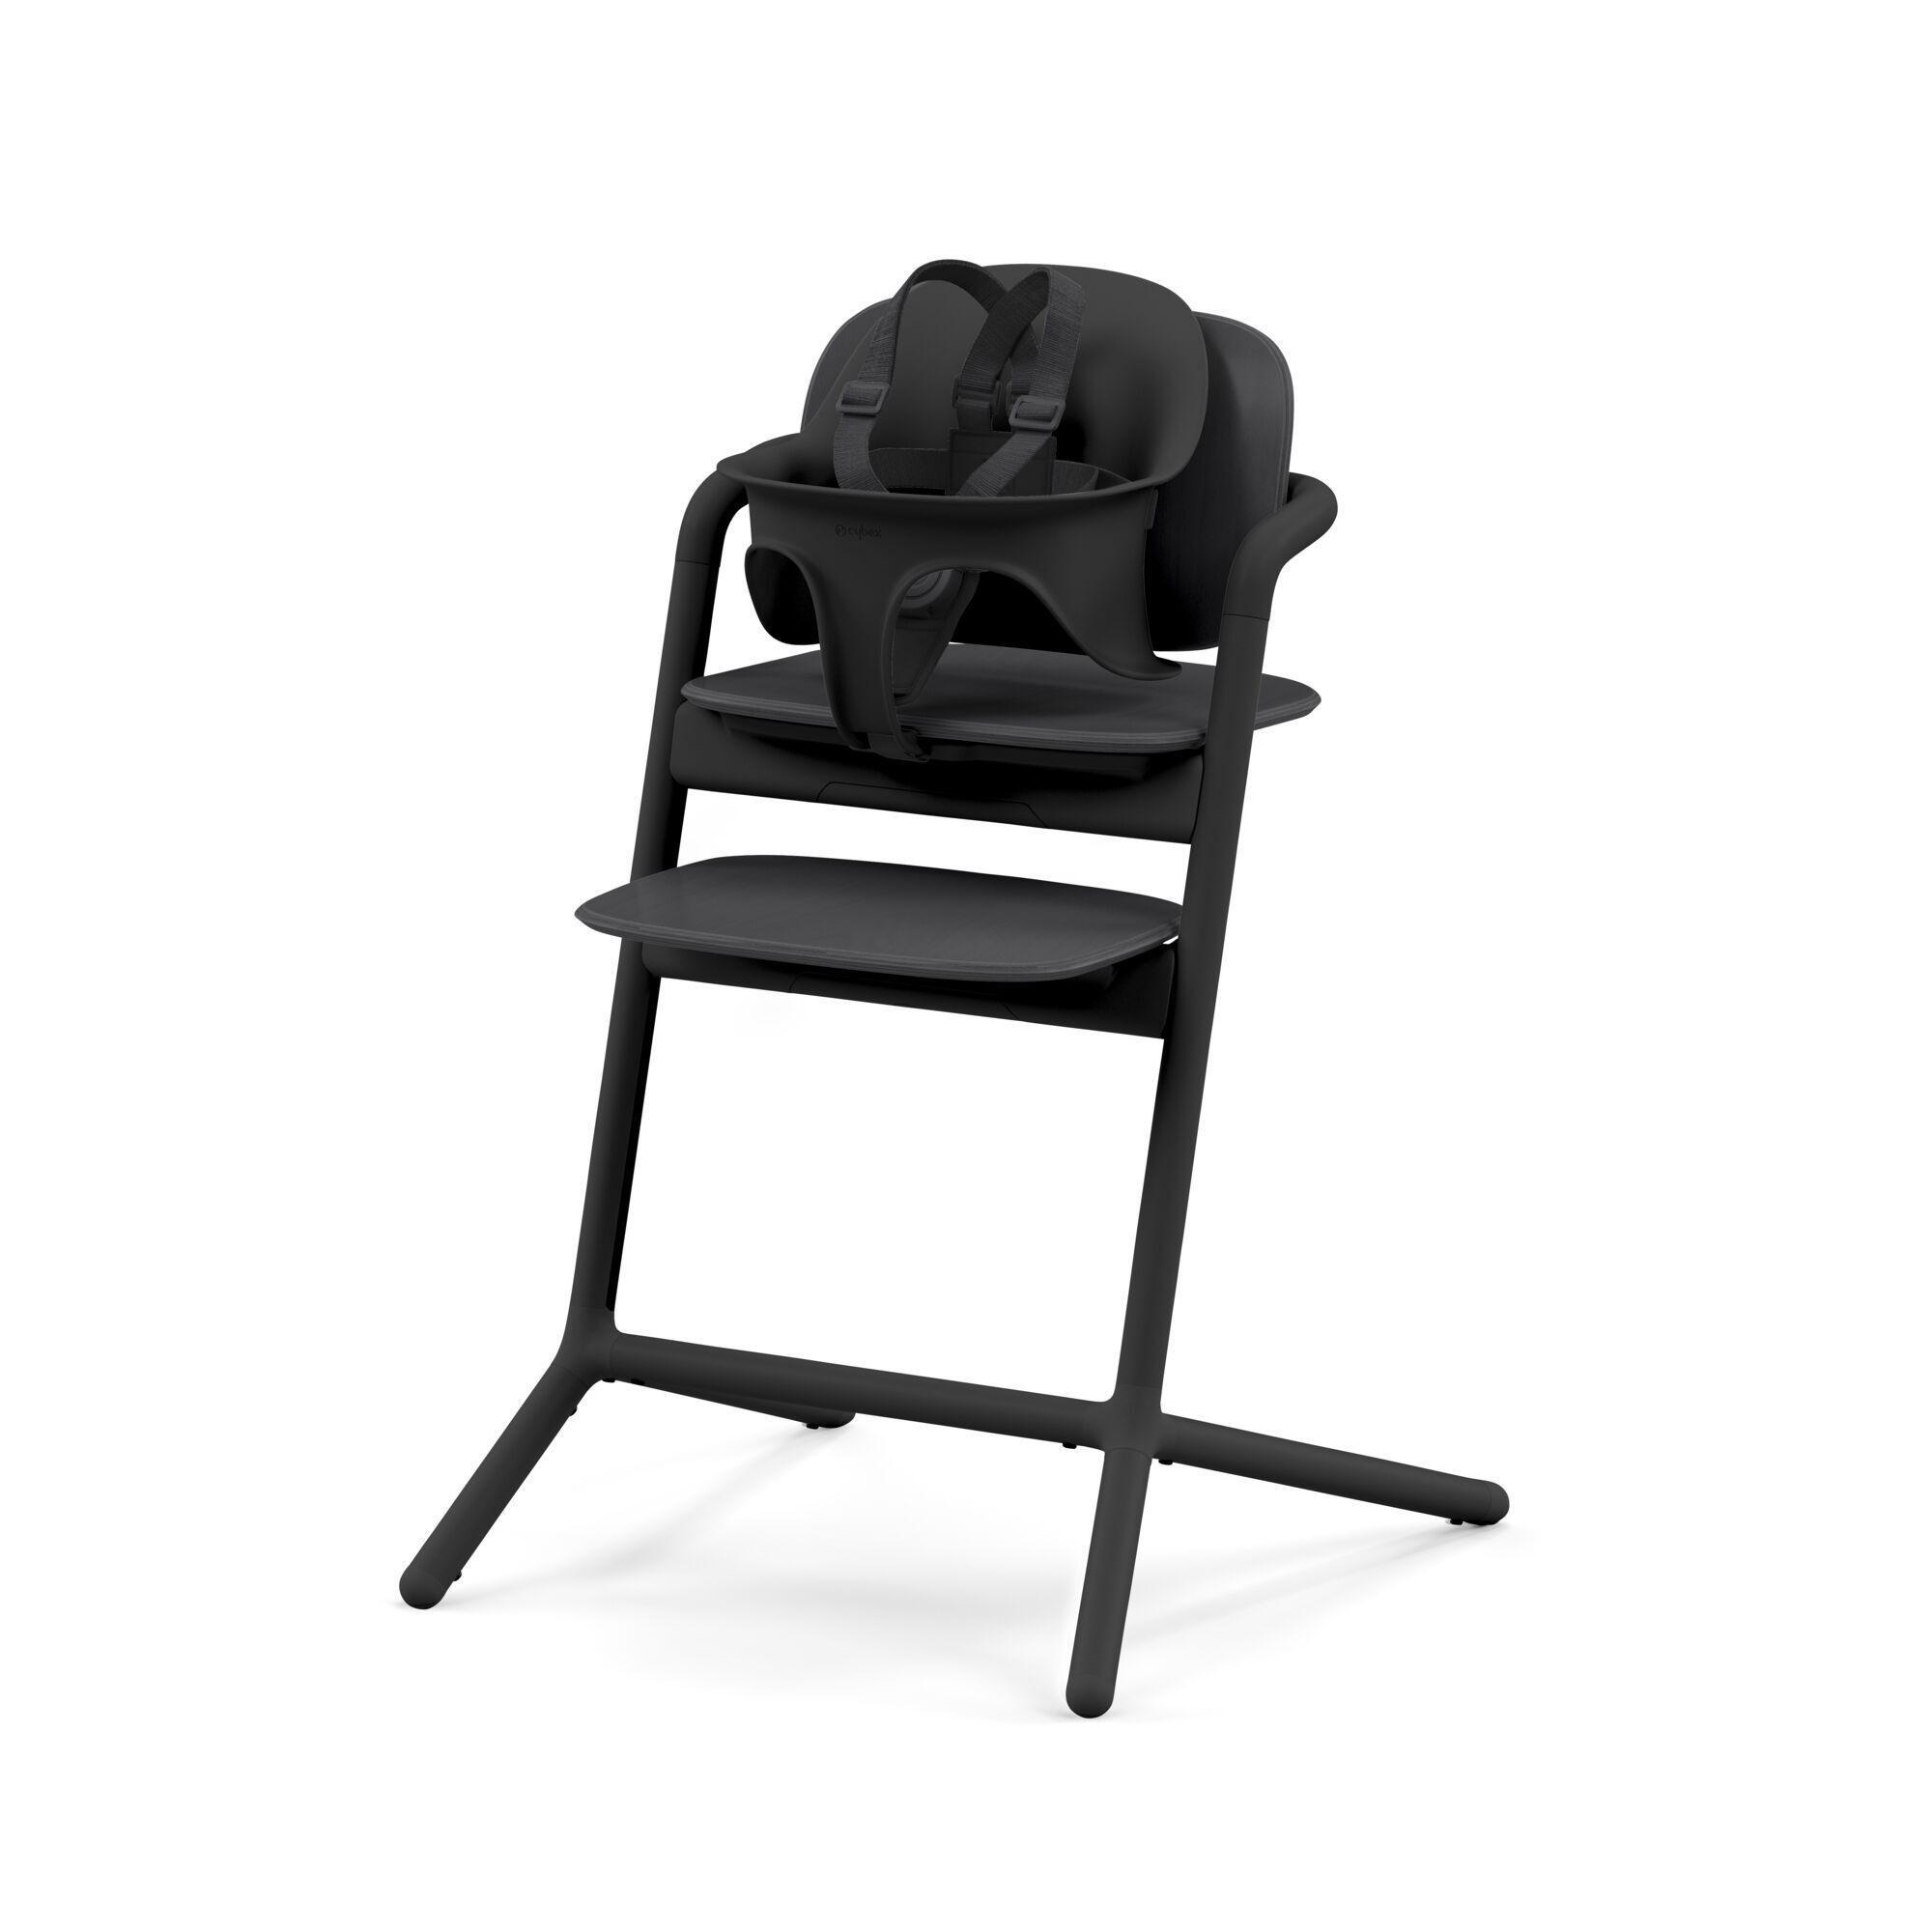 https://www.nordbaby.com/products/images/g130000/130676/eating-chairs-cybex-stunning-black-cybex-highchair-lemo-4in1-stunning-black-130676-77275.jpg